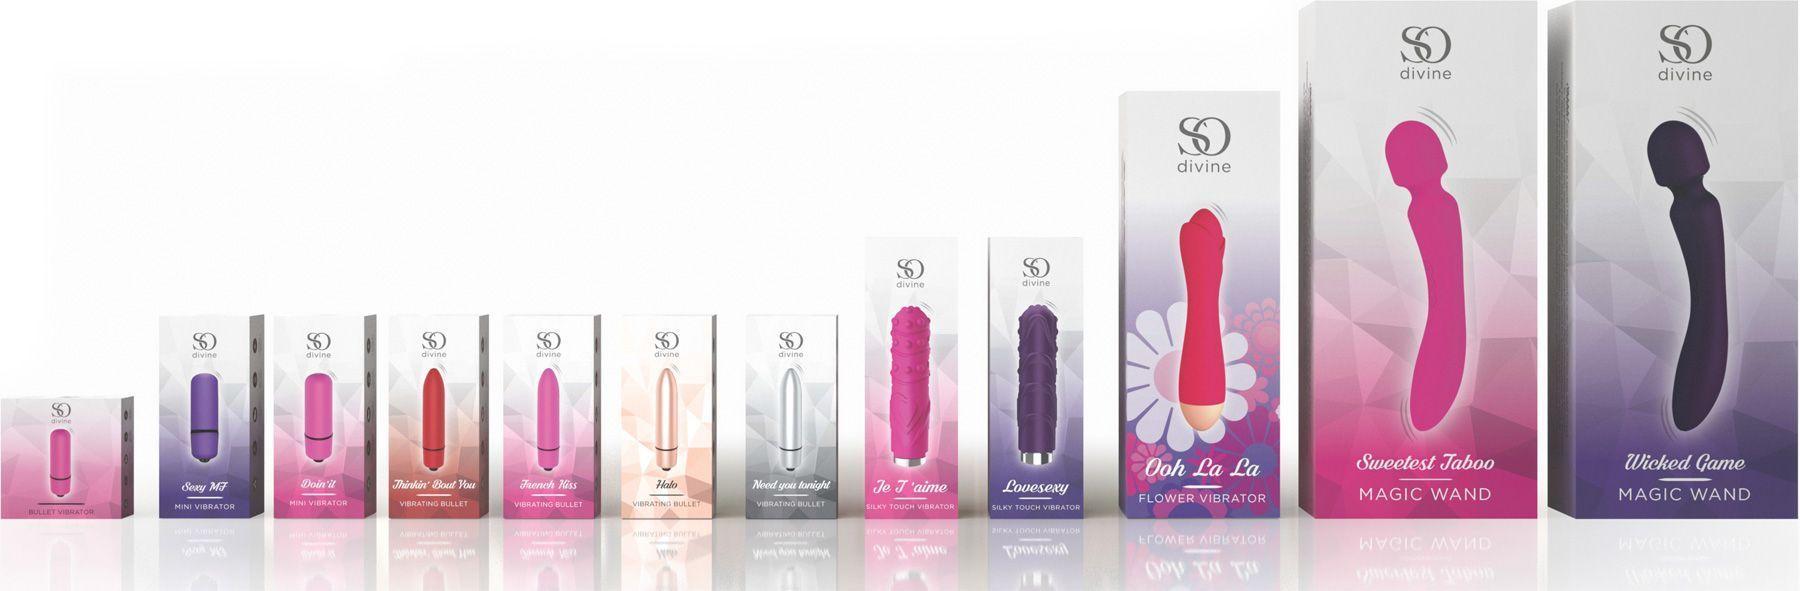 So Divine have a great selection of vibrators to choose from